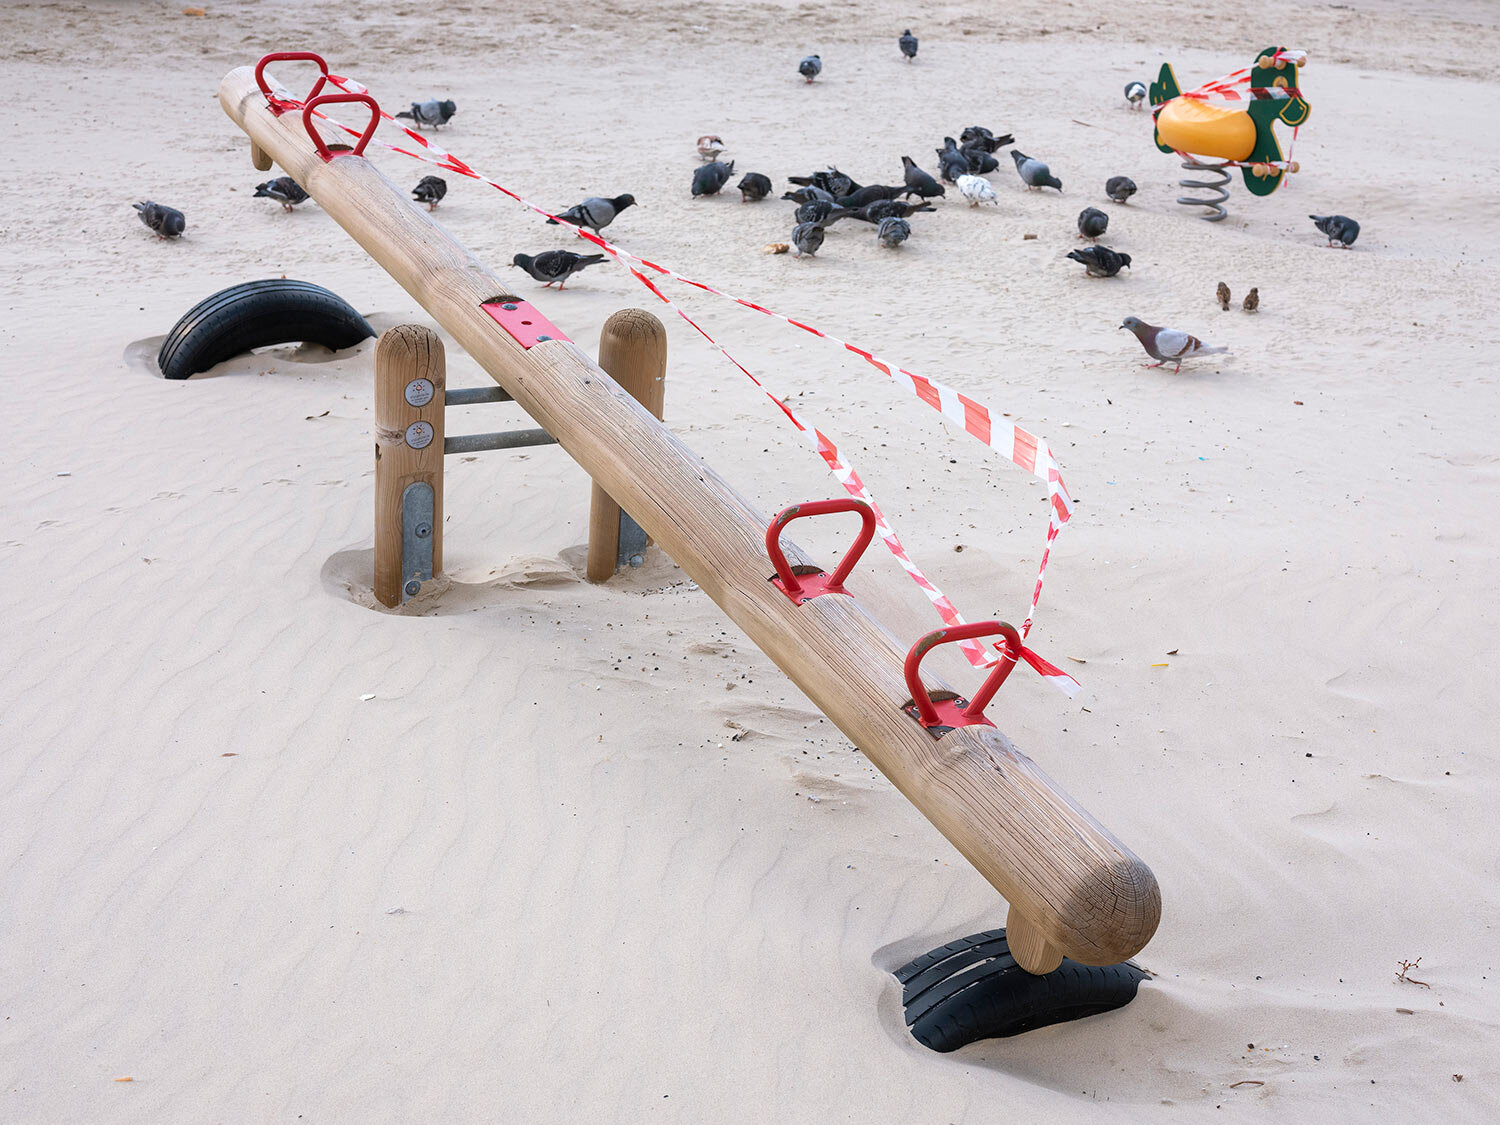  This Thursday, March 19, 2020 photo shows a seesaw at Tel Aviv's beachfront wrapped in tape to prevent public access. (AP Photo/Oded Balilty) 